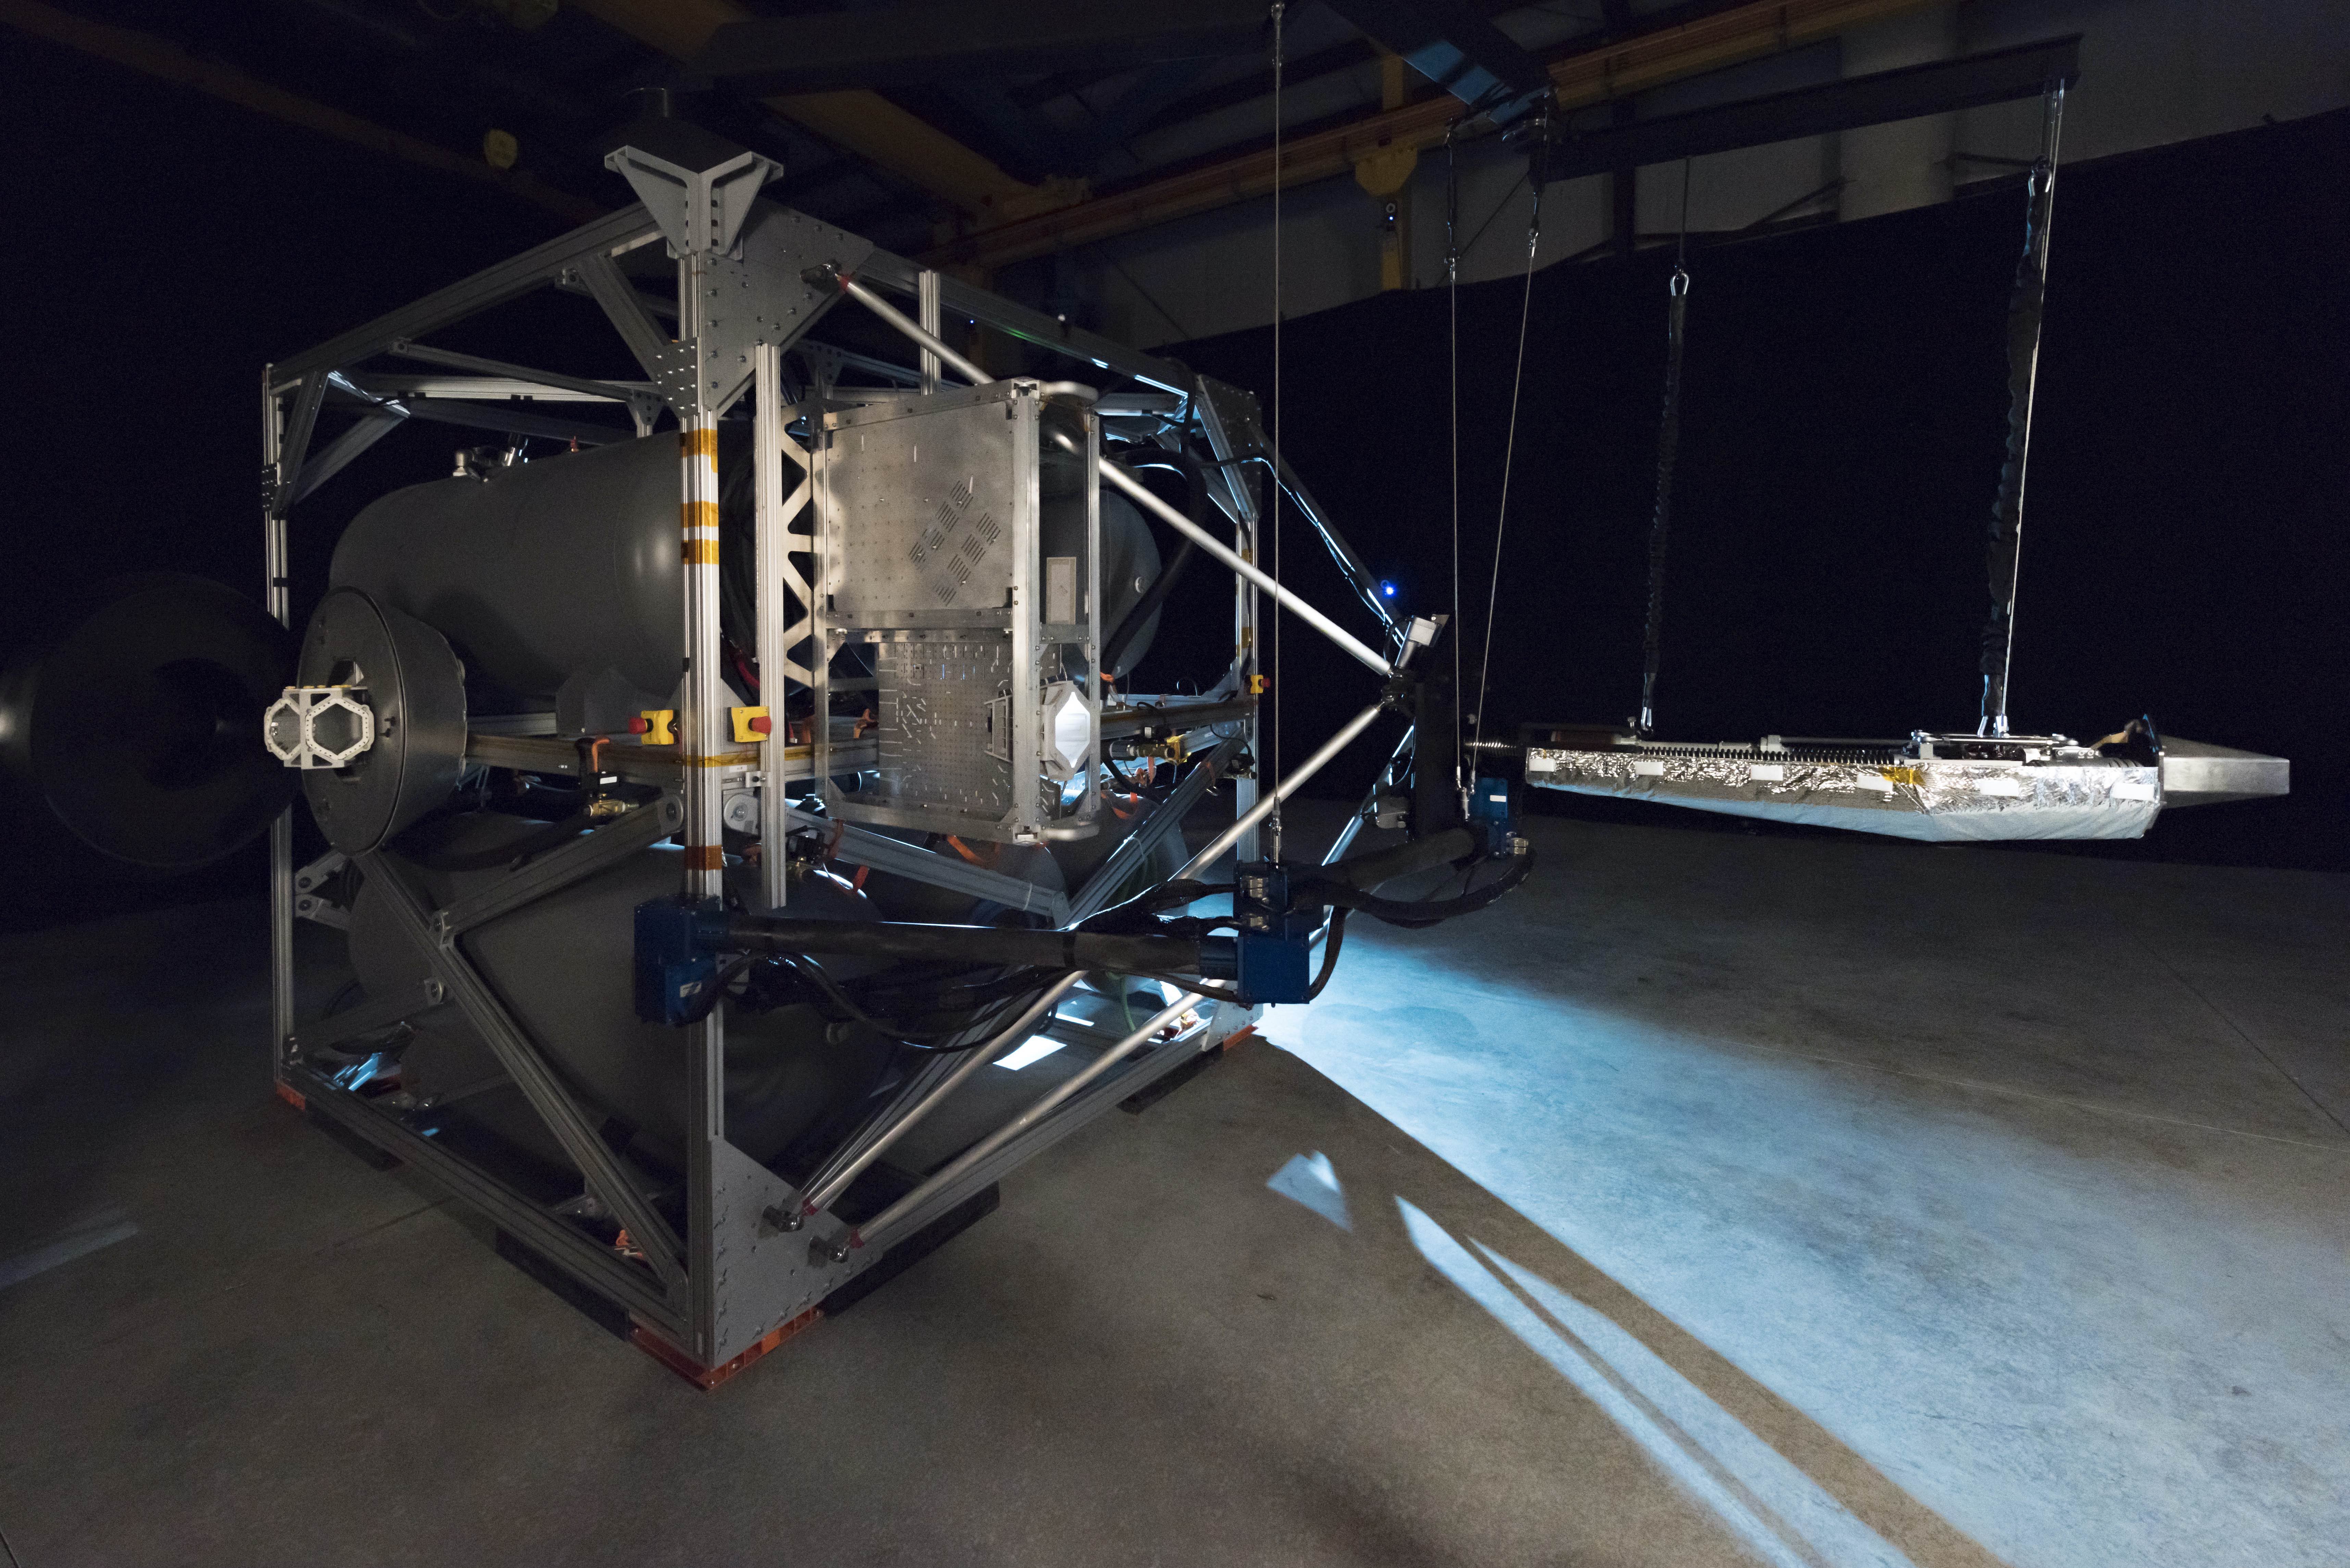 Validation testing of the BiBlade sampling system on a full-scale air-levitated 2200kg spacecraft emulator.